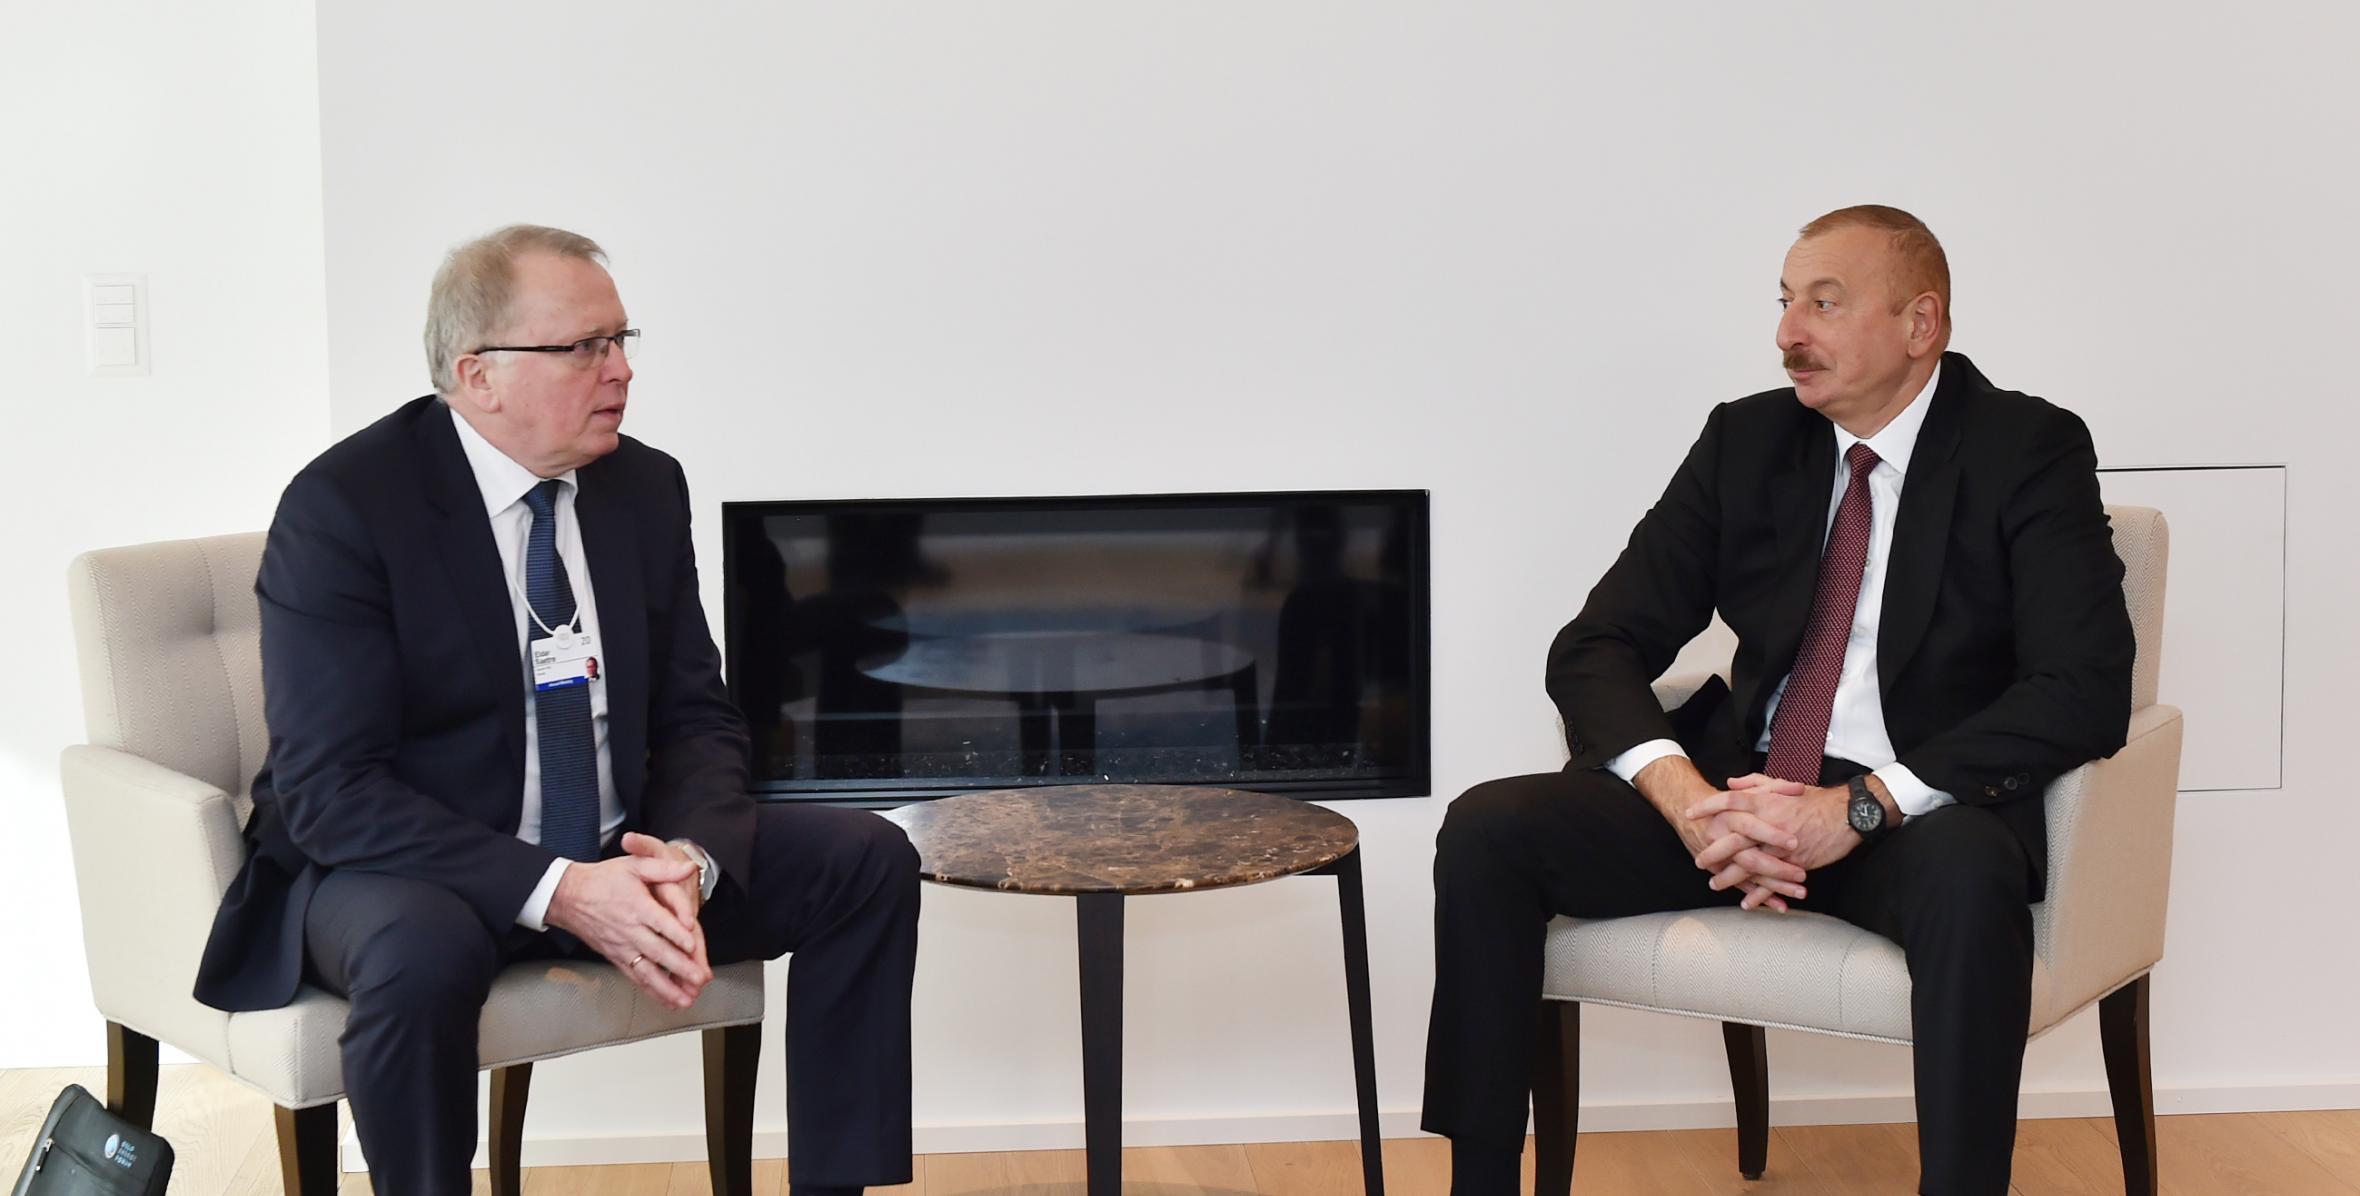 Ilham Aliyev met with Chief Executive Officer of Equinor in Davos